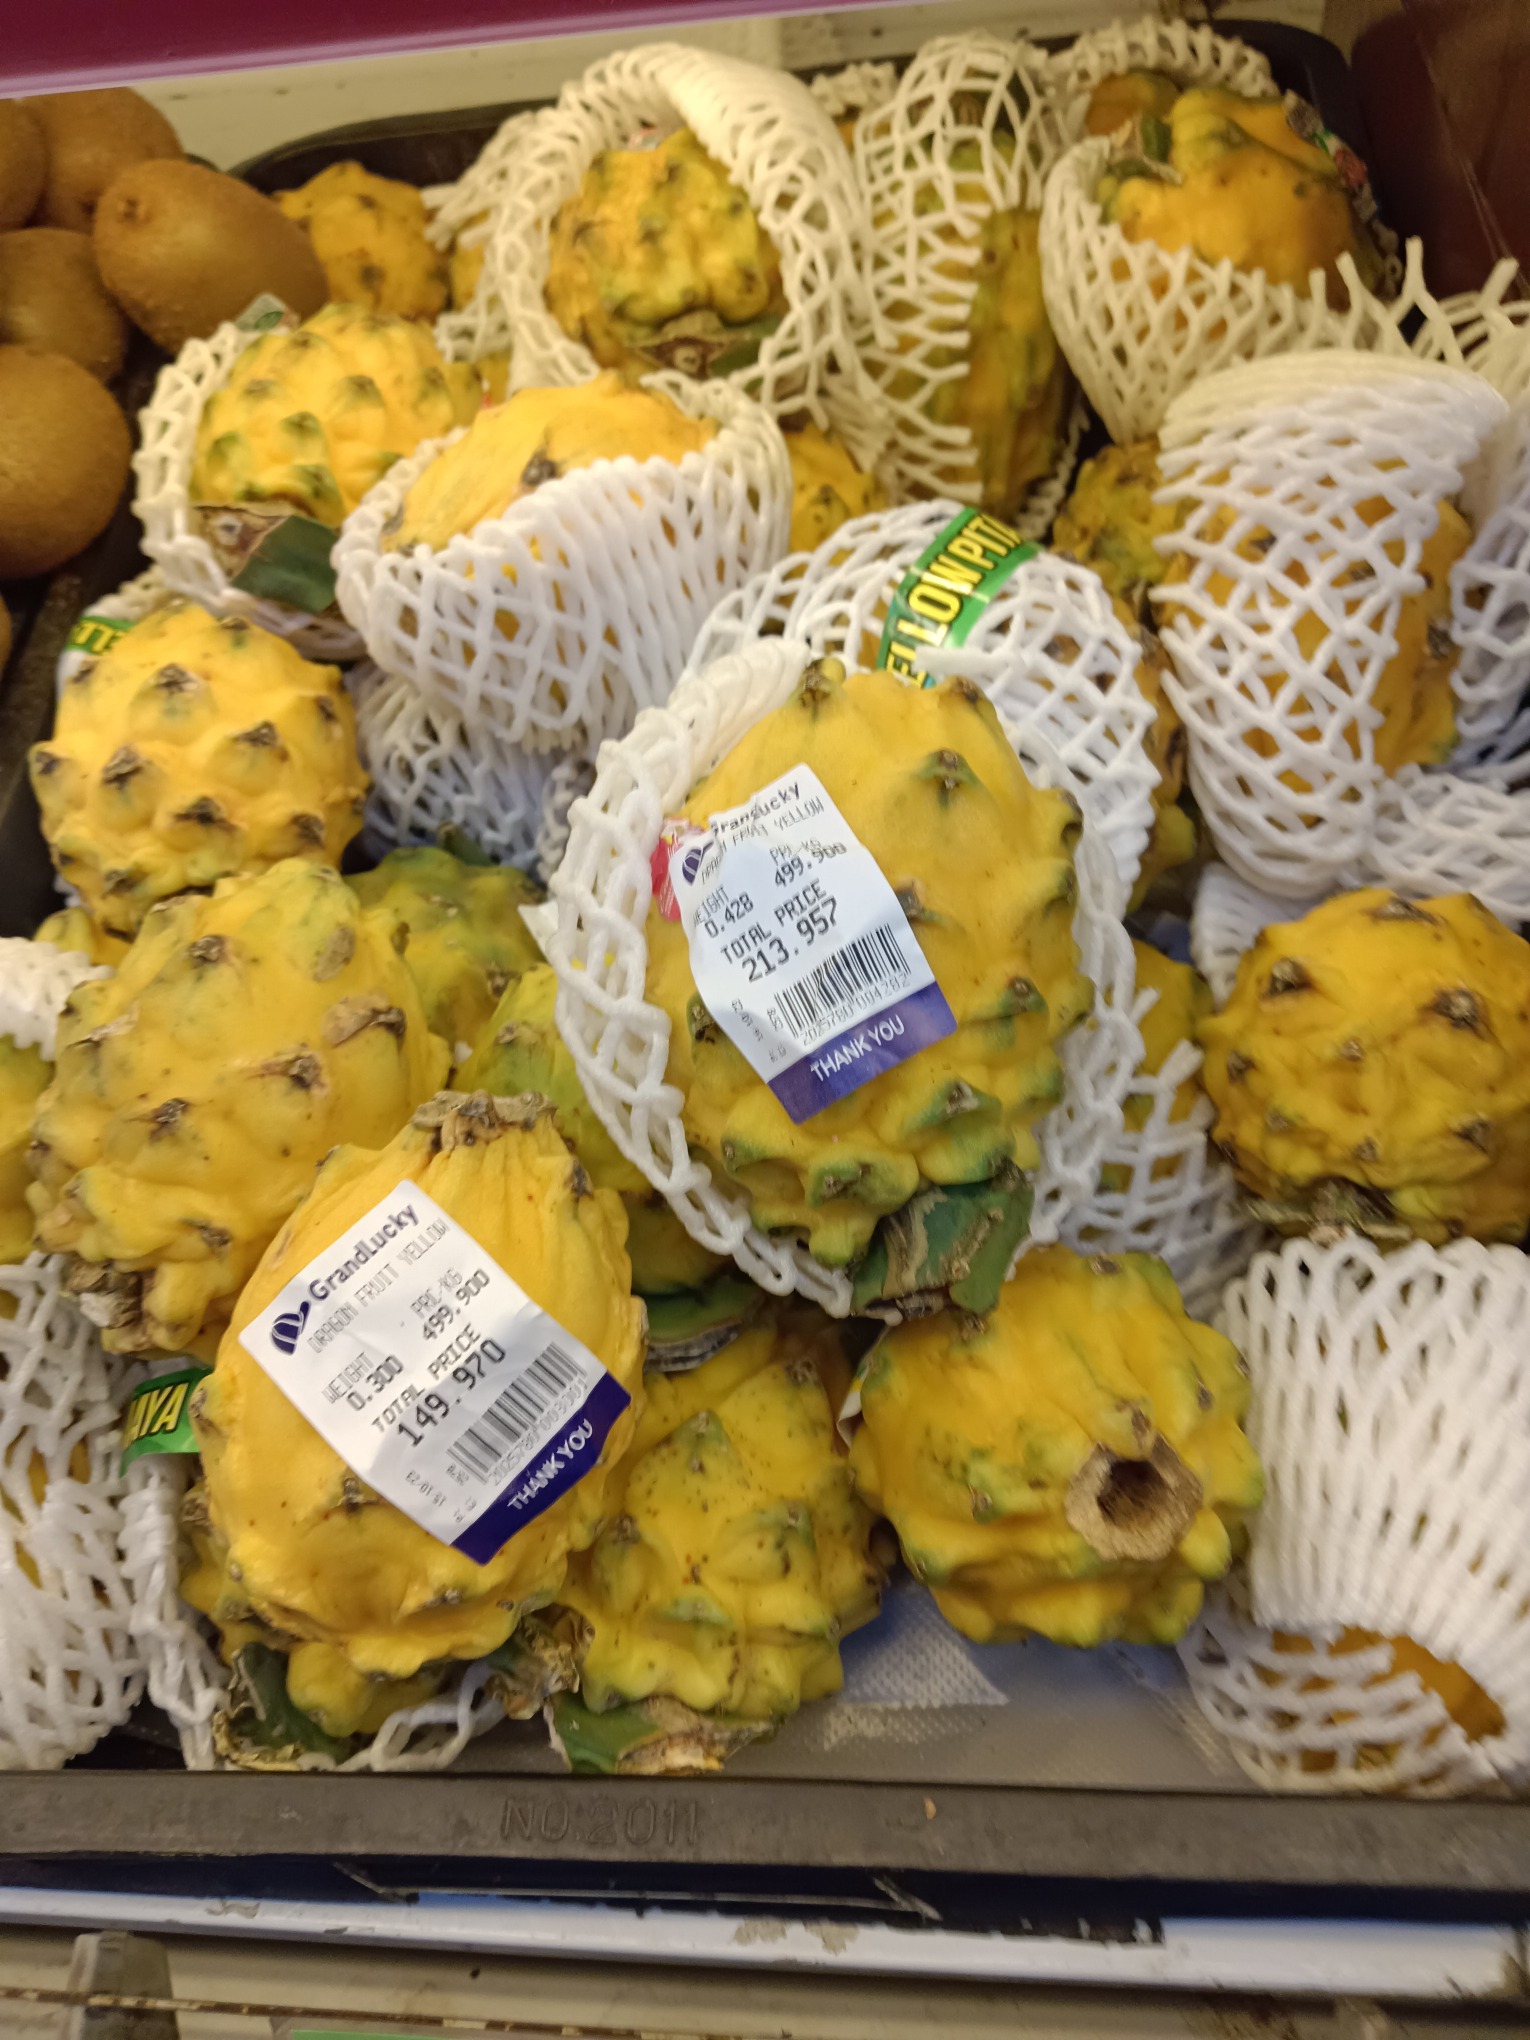 Yellow Dragonfruit at Whole Foods Market